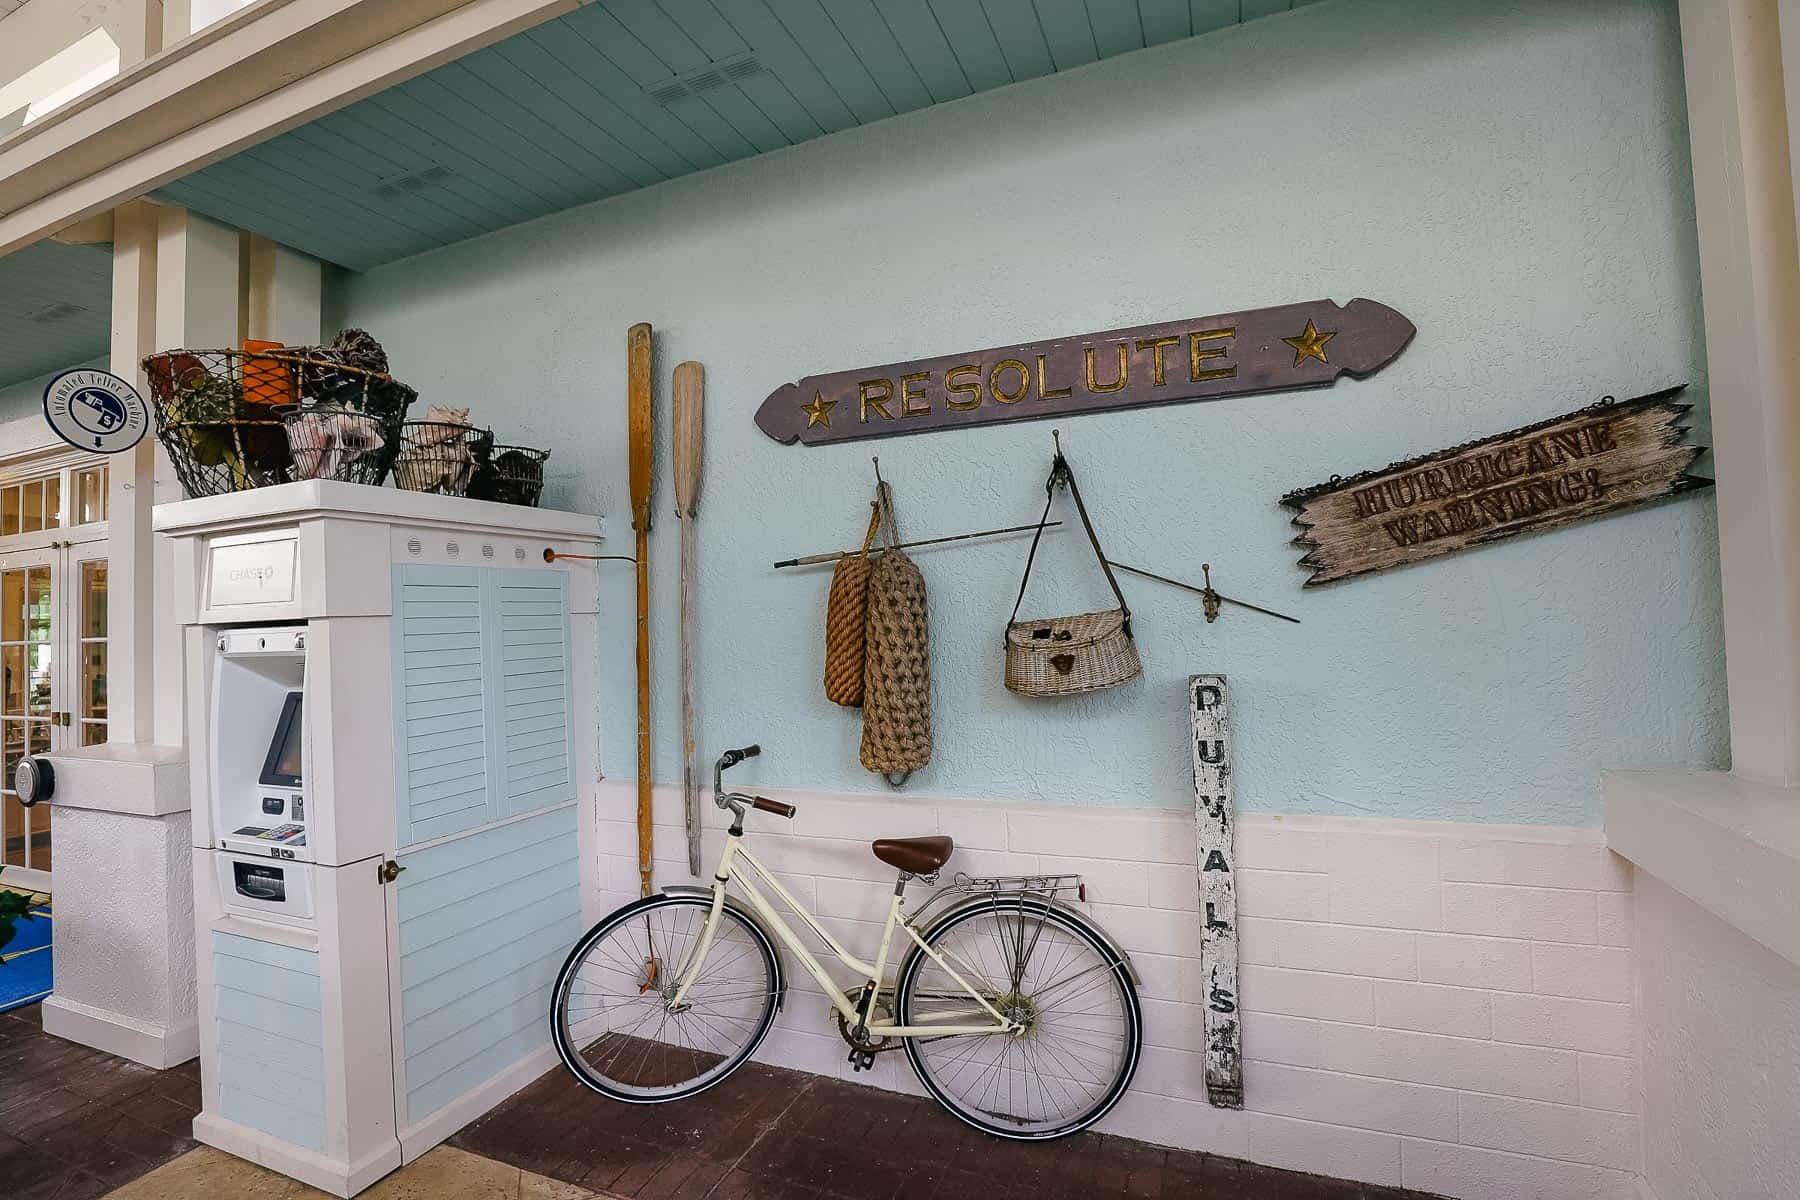 theming elements like an old bike and signs at Disney's Old Key West